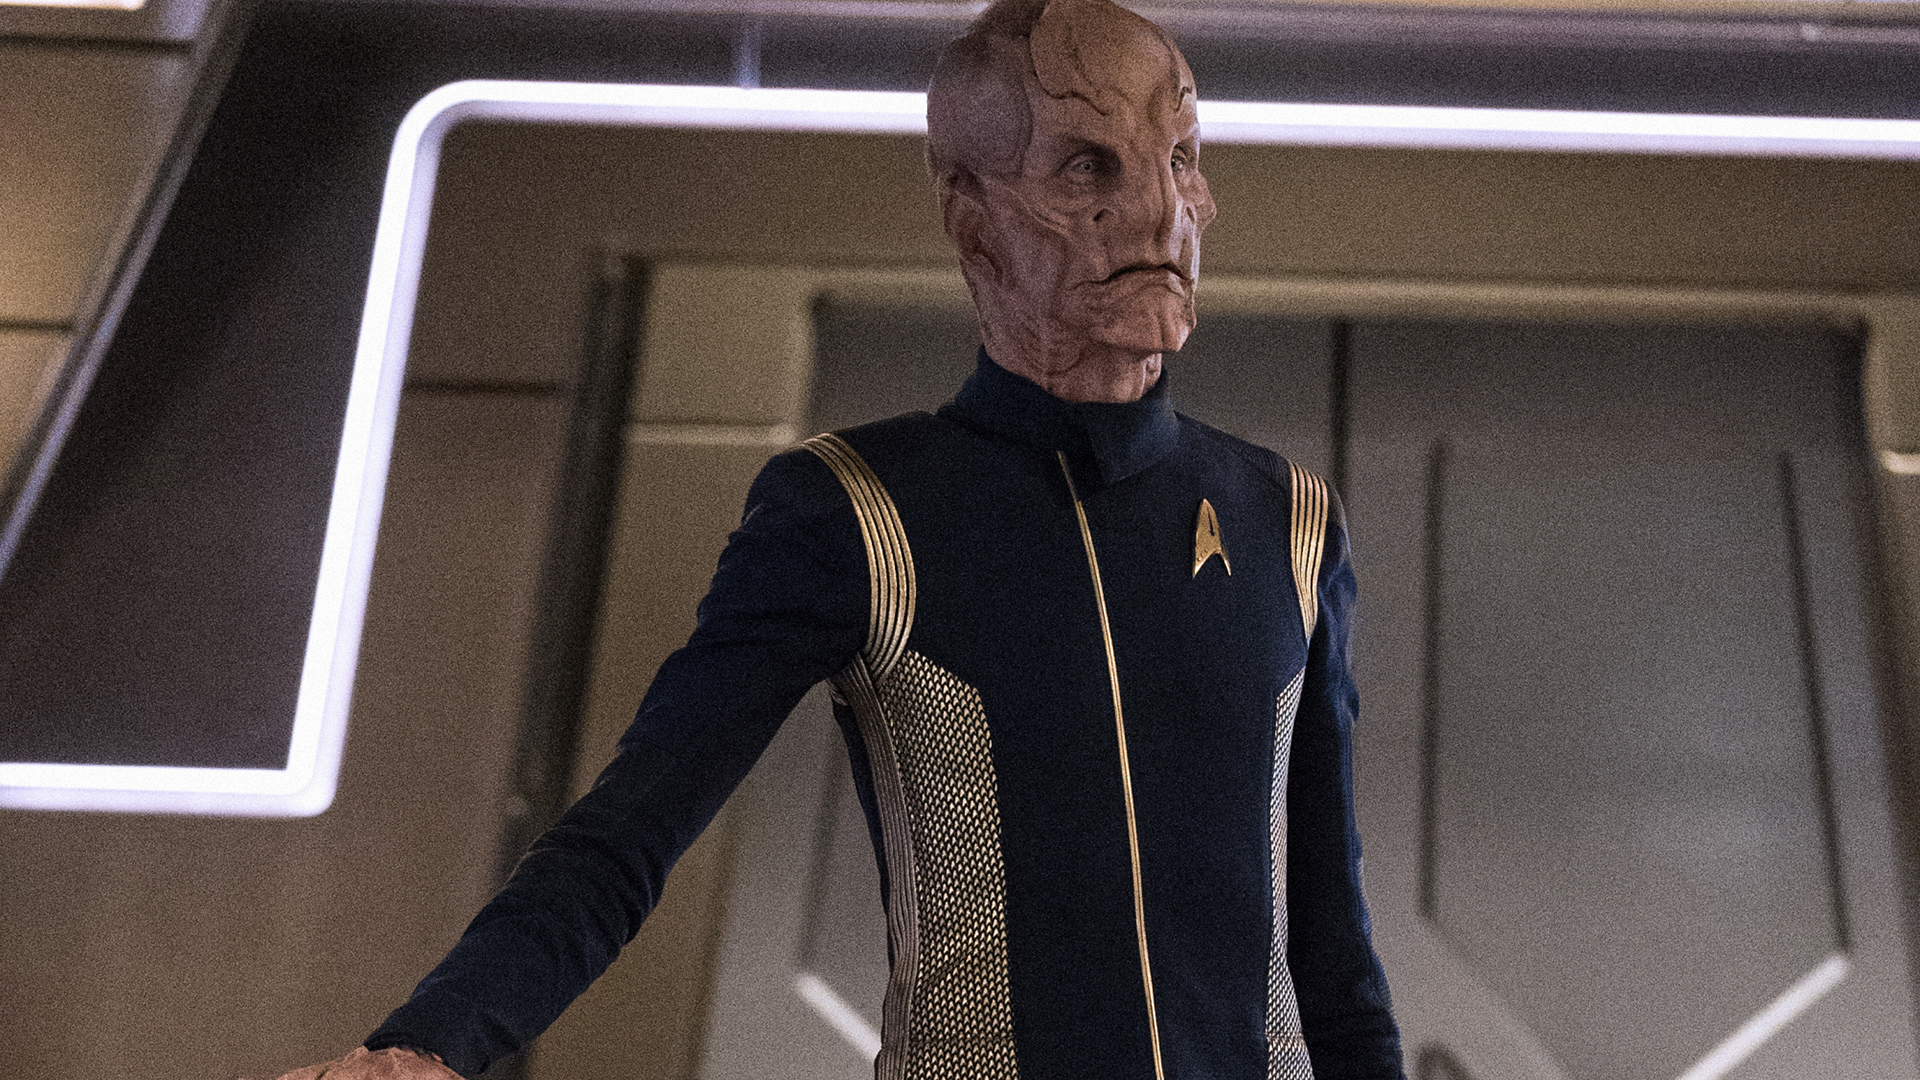 Check Out New Photos From Episode 3 Of Star Trek: Discovery - Page 2 - Star Trek ...1920 x 1080